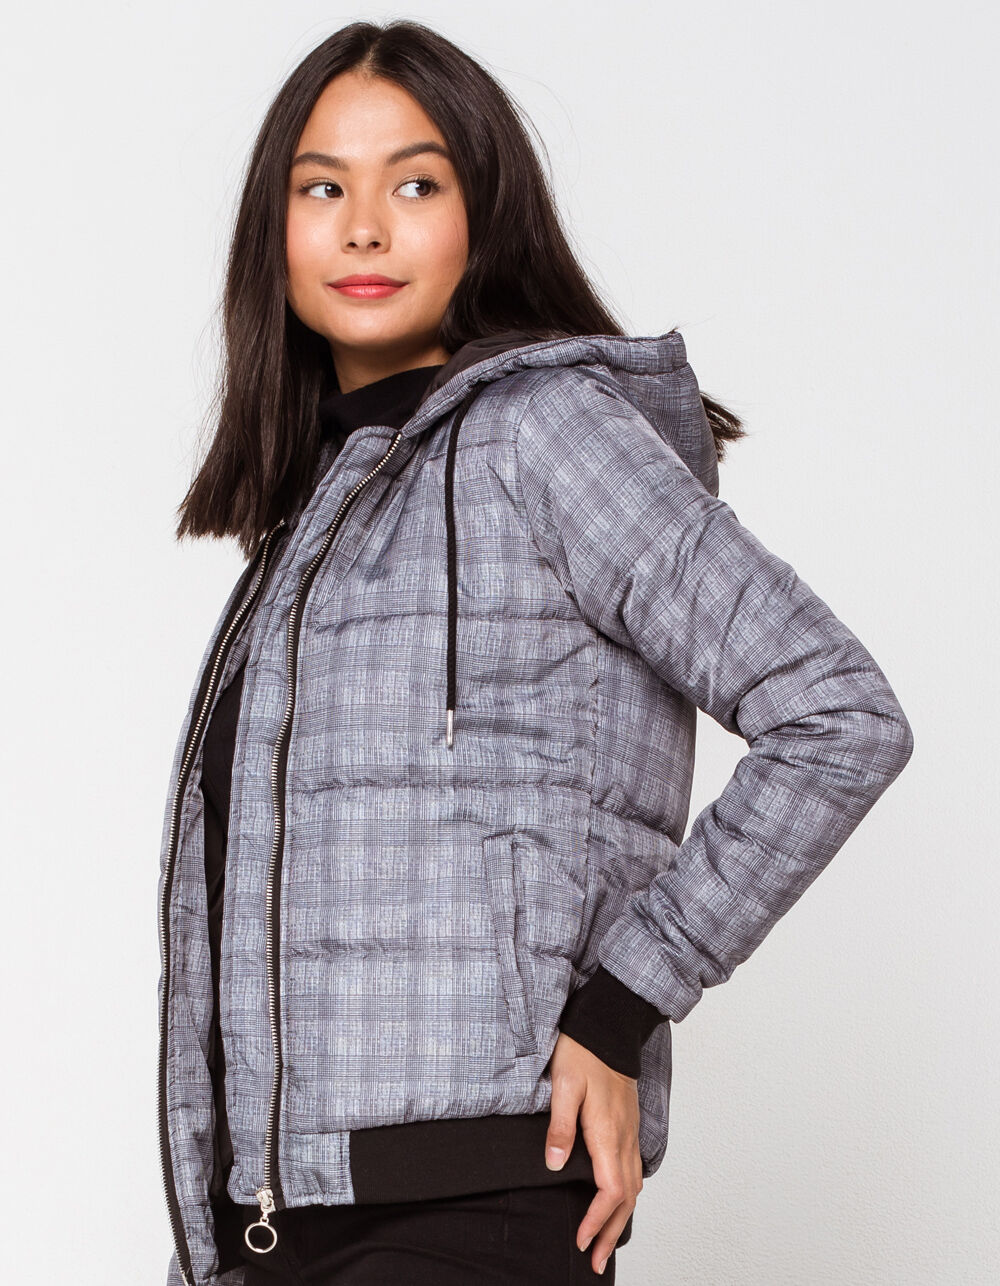 SKY AND SPARROW Plaid Womens Puffer Jacket - GRAY COMBO | Tillys